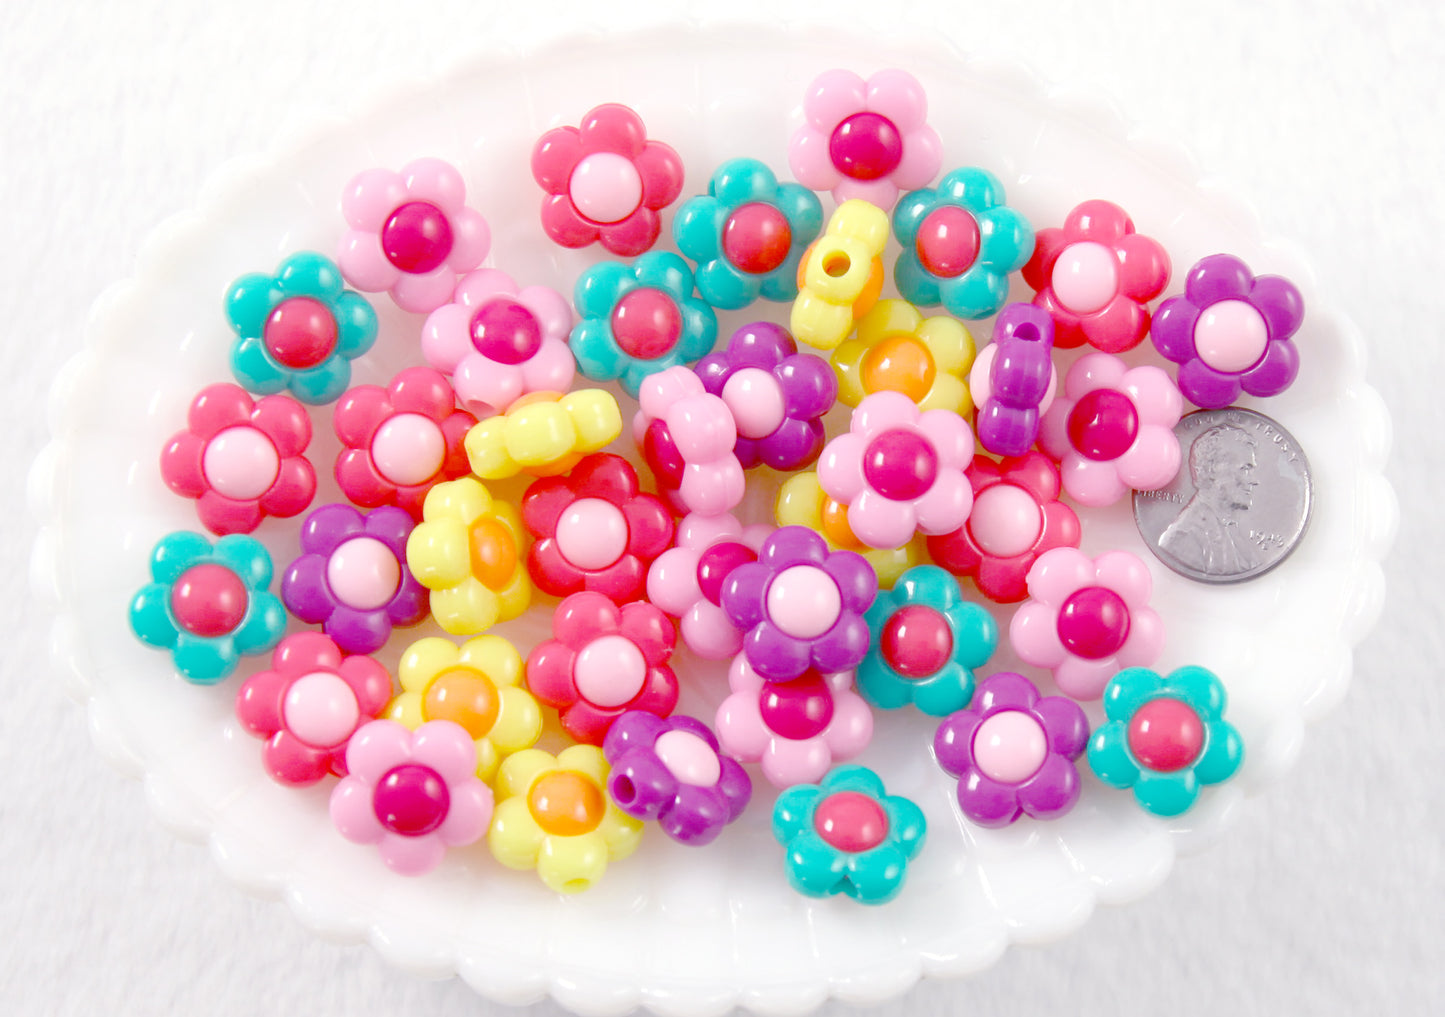 Flower Beads - 16mm Amazing Bright Color Acrylic Flower Beads - Resin Flower Beads - 30 pc set